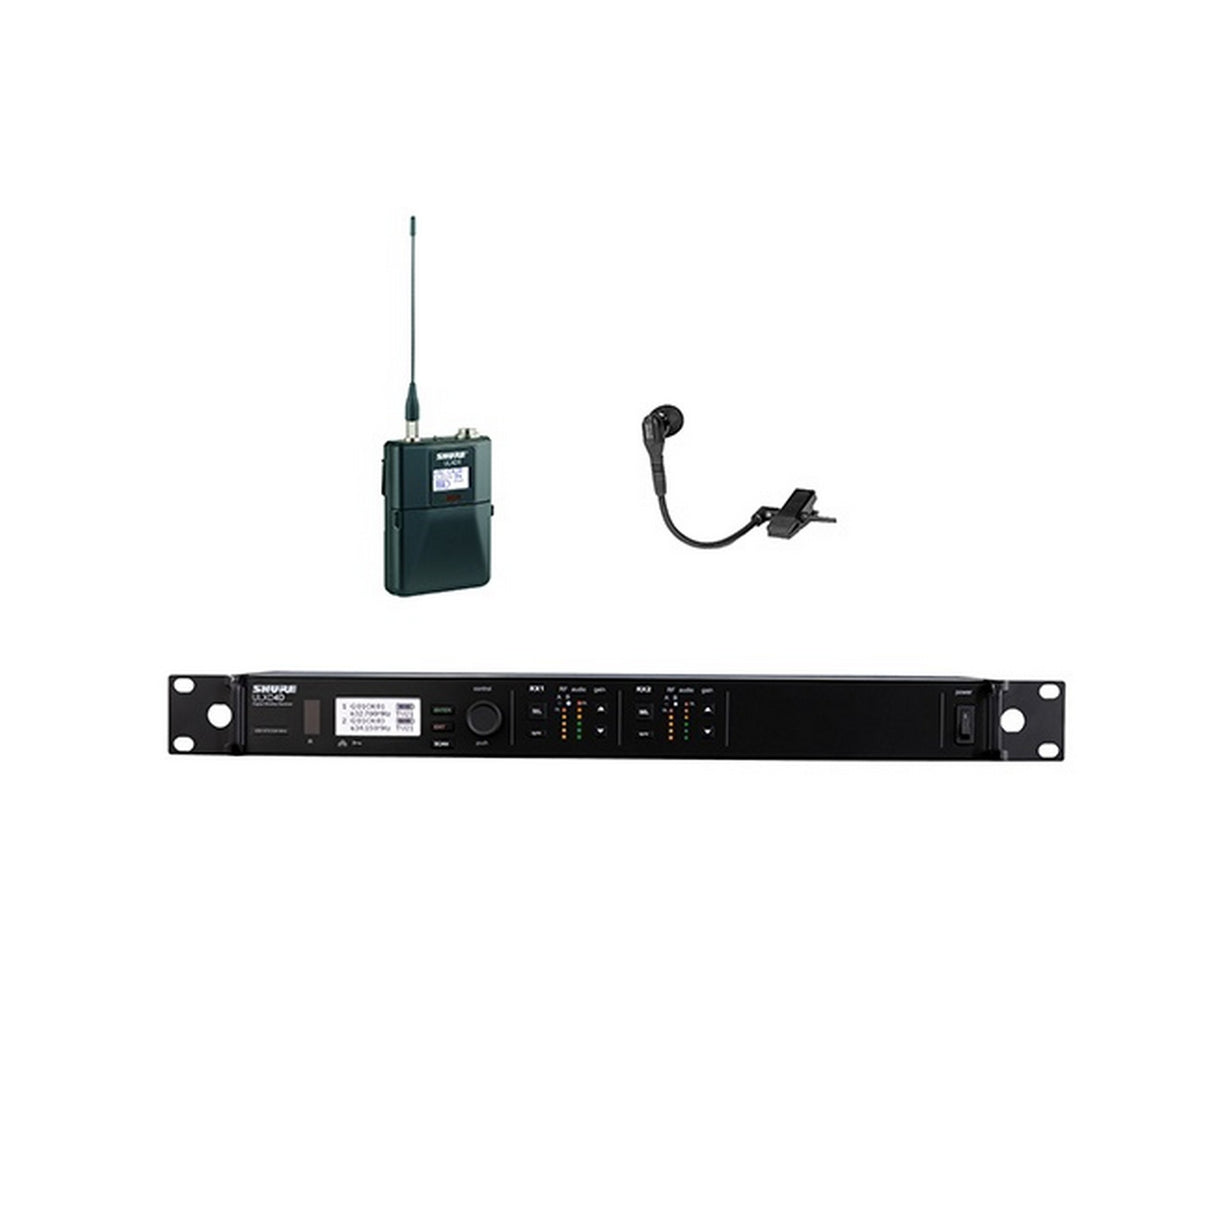 Shure ULXD14D/WB98HC BETA 98H/C Clip-On Instrument Wireless Microphone System, J50A 572-608/614-616 MHz